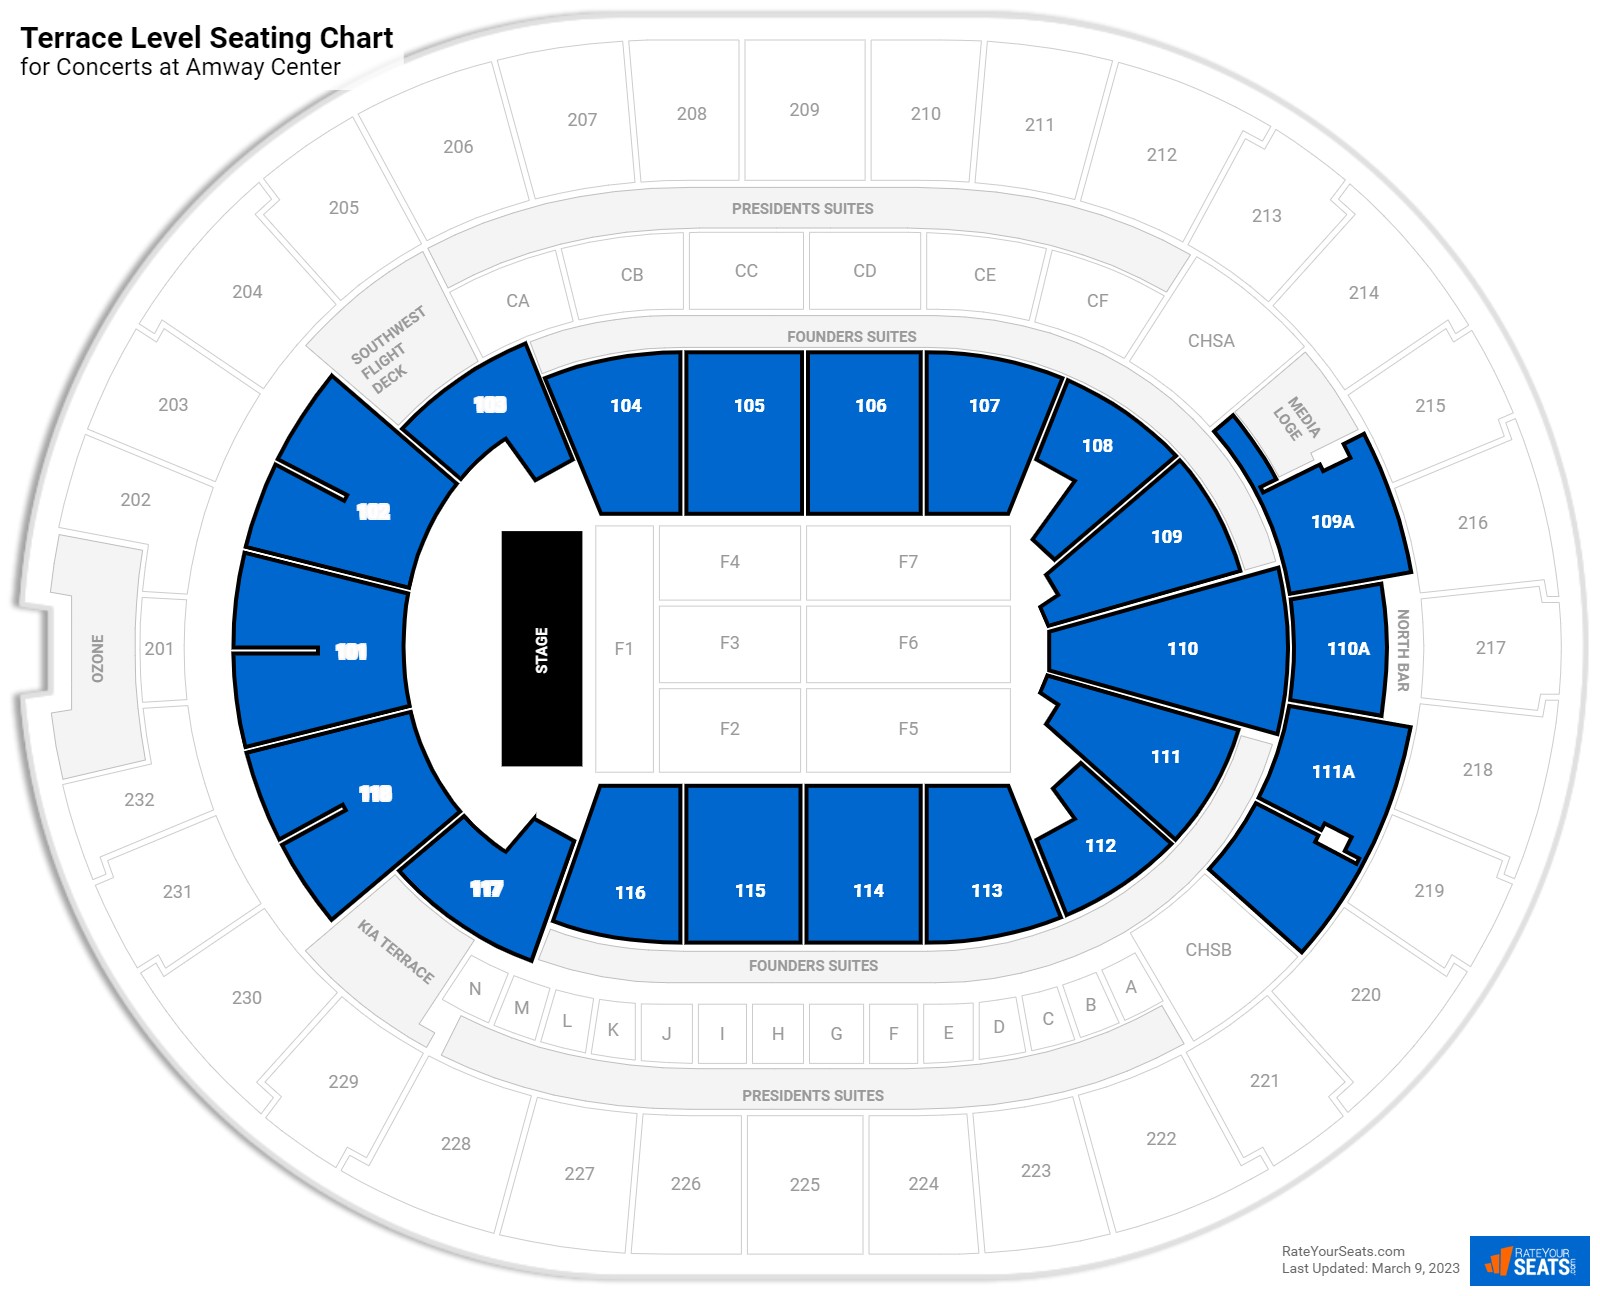 Amway Center Terrace Level - RateYourSeats.com